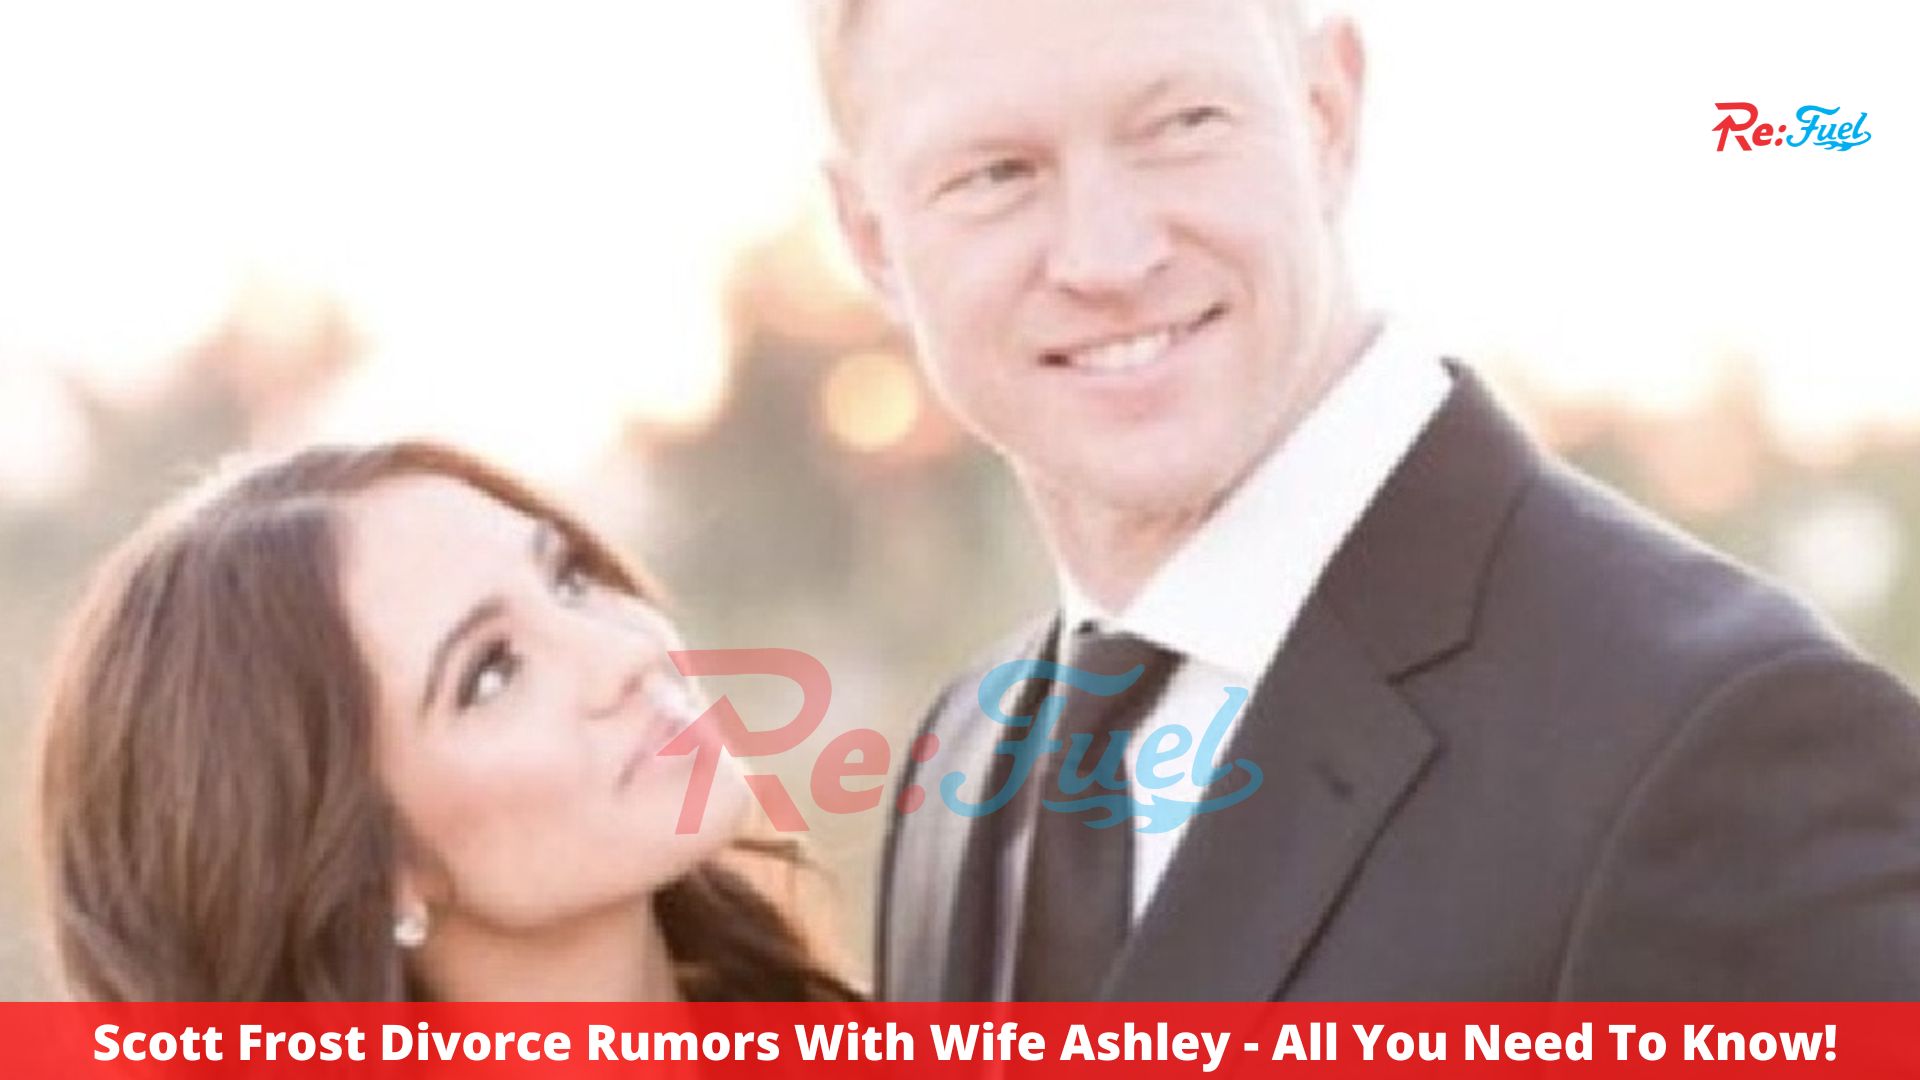 Scott Frost Divorce Rumors With Wife Ashley - All You Need To Know!